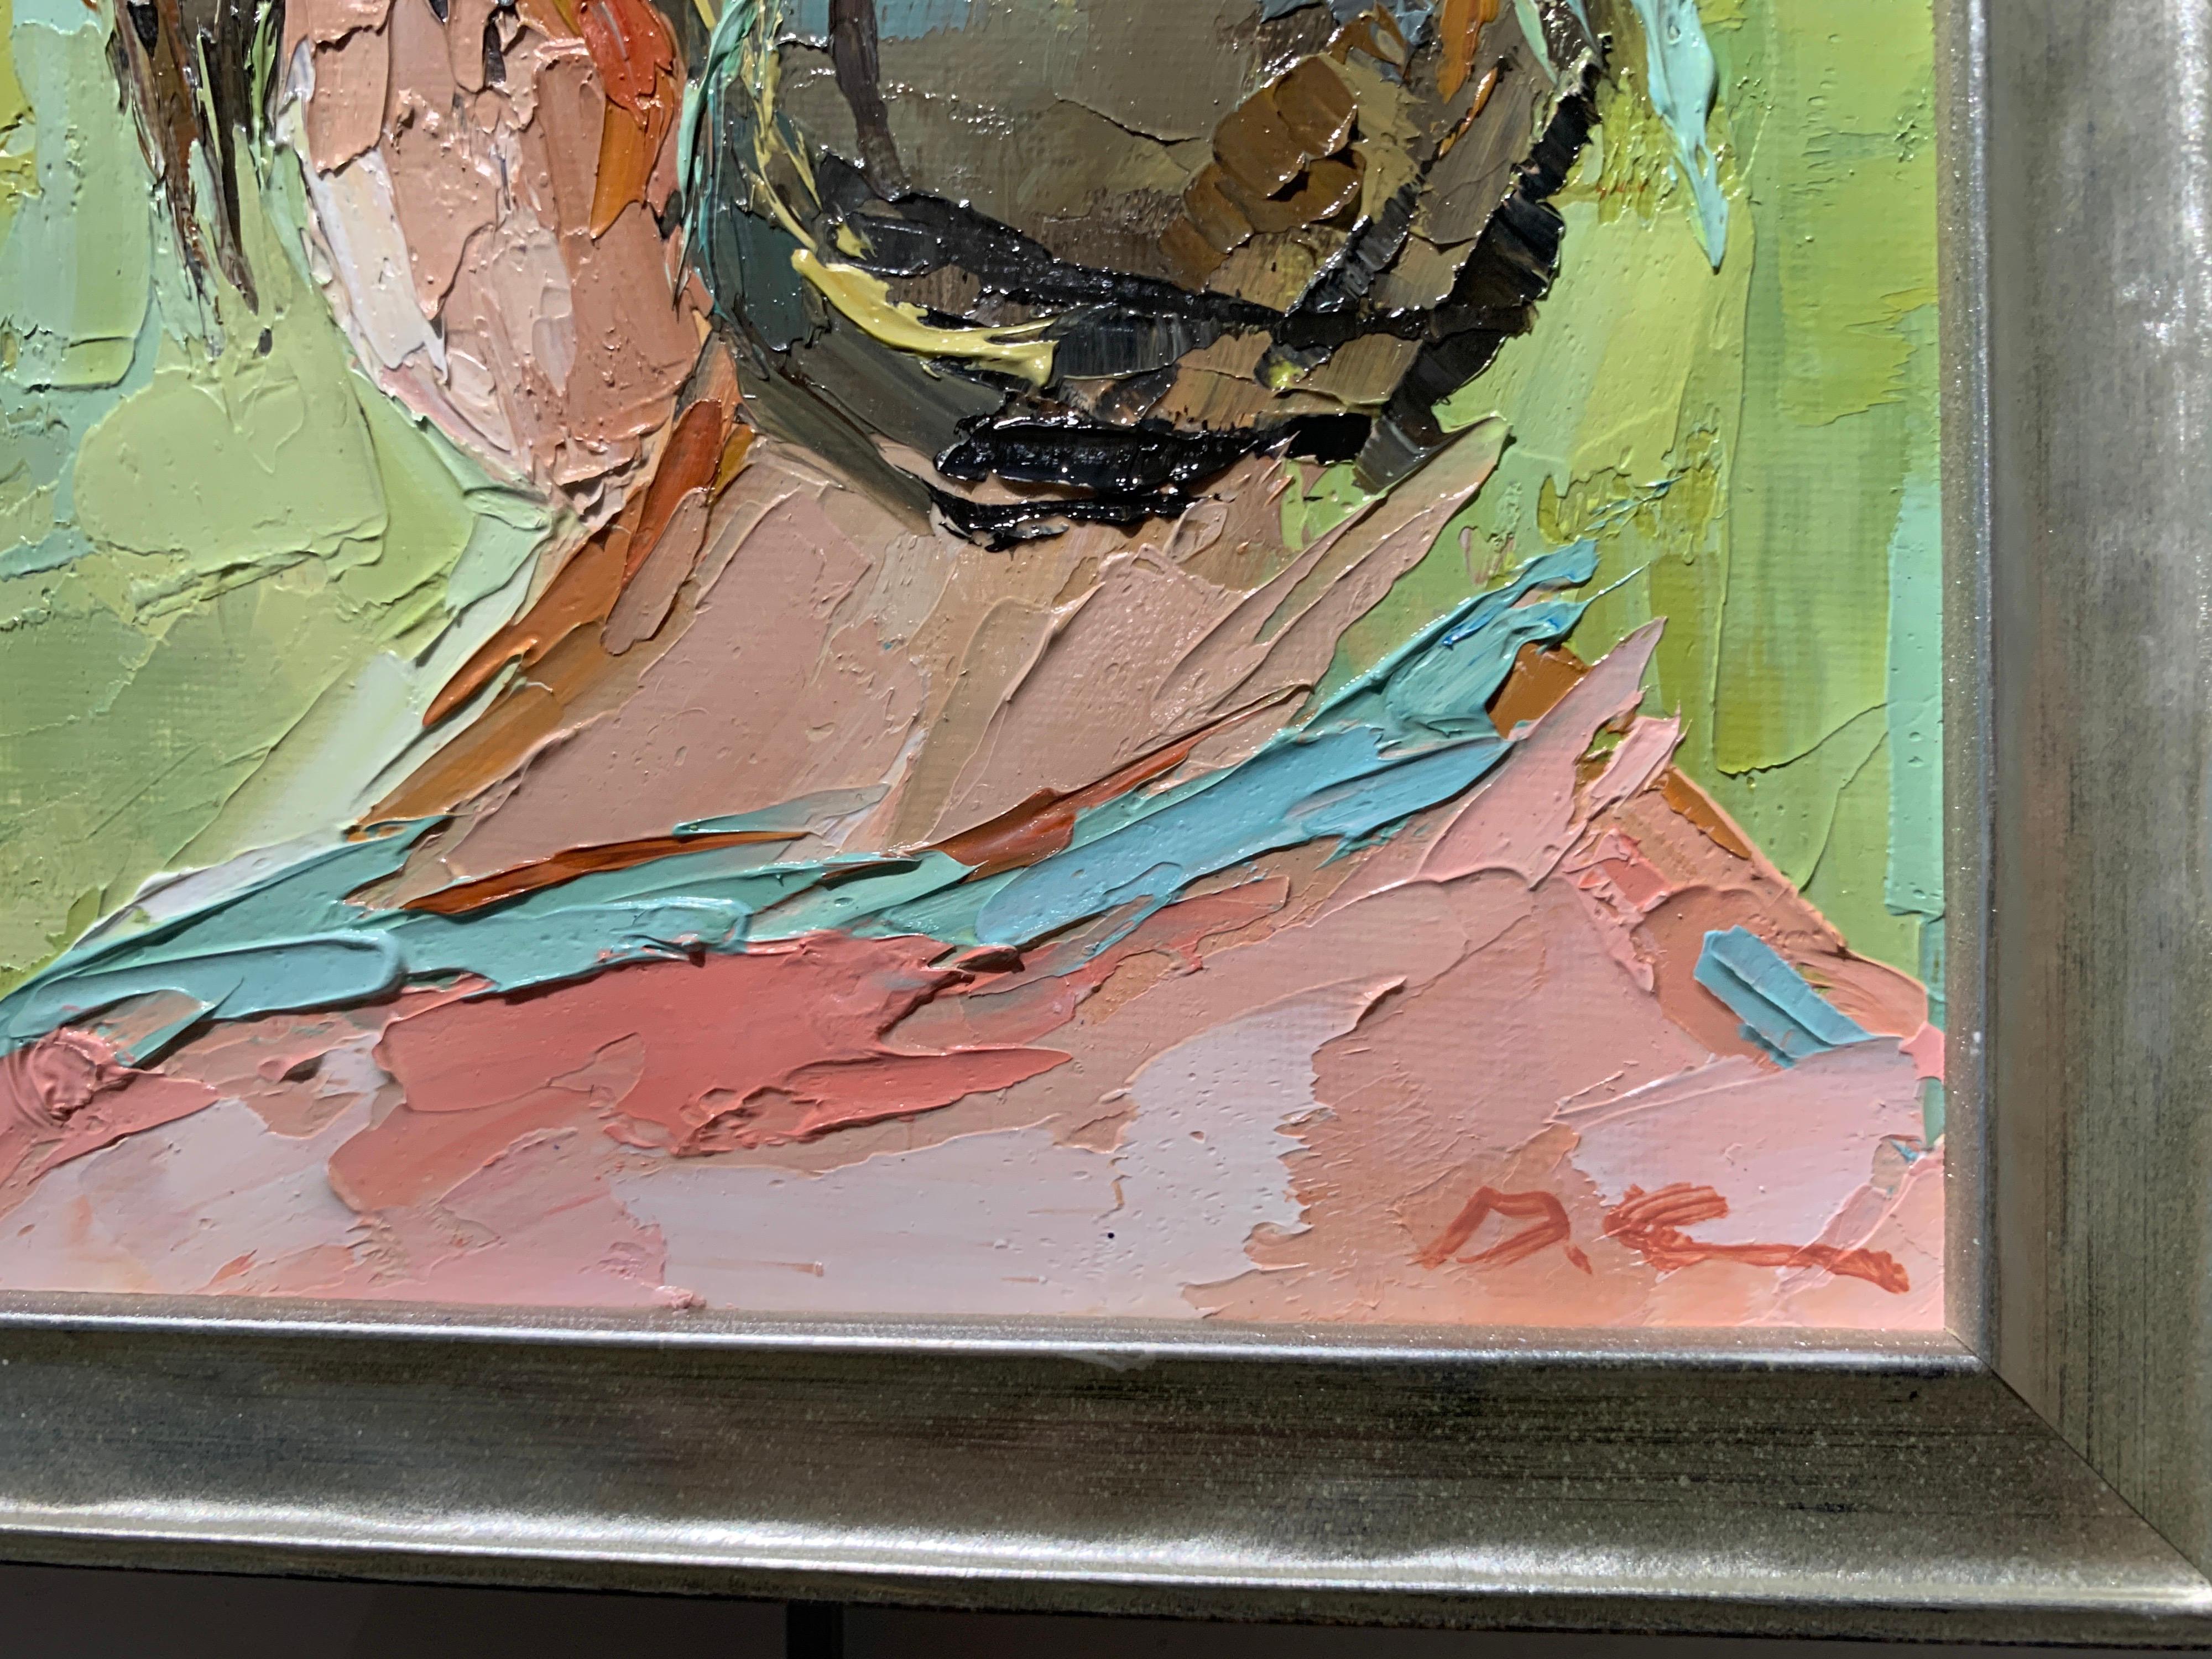 'Head Portrait' is a petite framed oil on canvas Impressionist painting created by American artist Geri Eubanks in 2021. Featuring a vibrant palette made of blue, pink, coral, green, brown, off-white and black tones, this small figurative painting